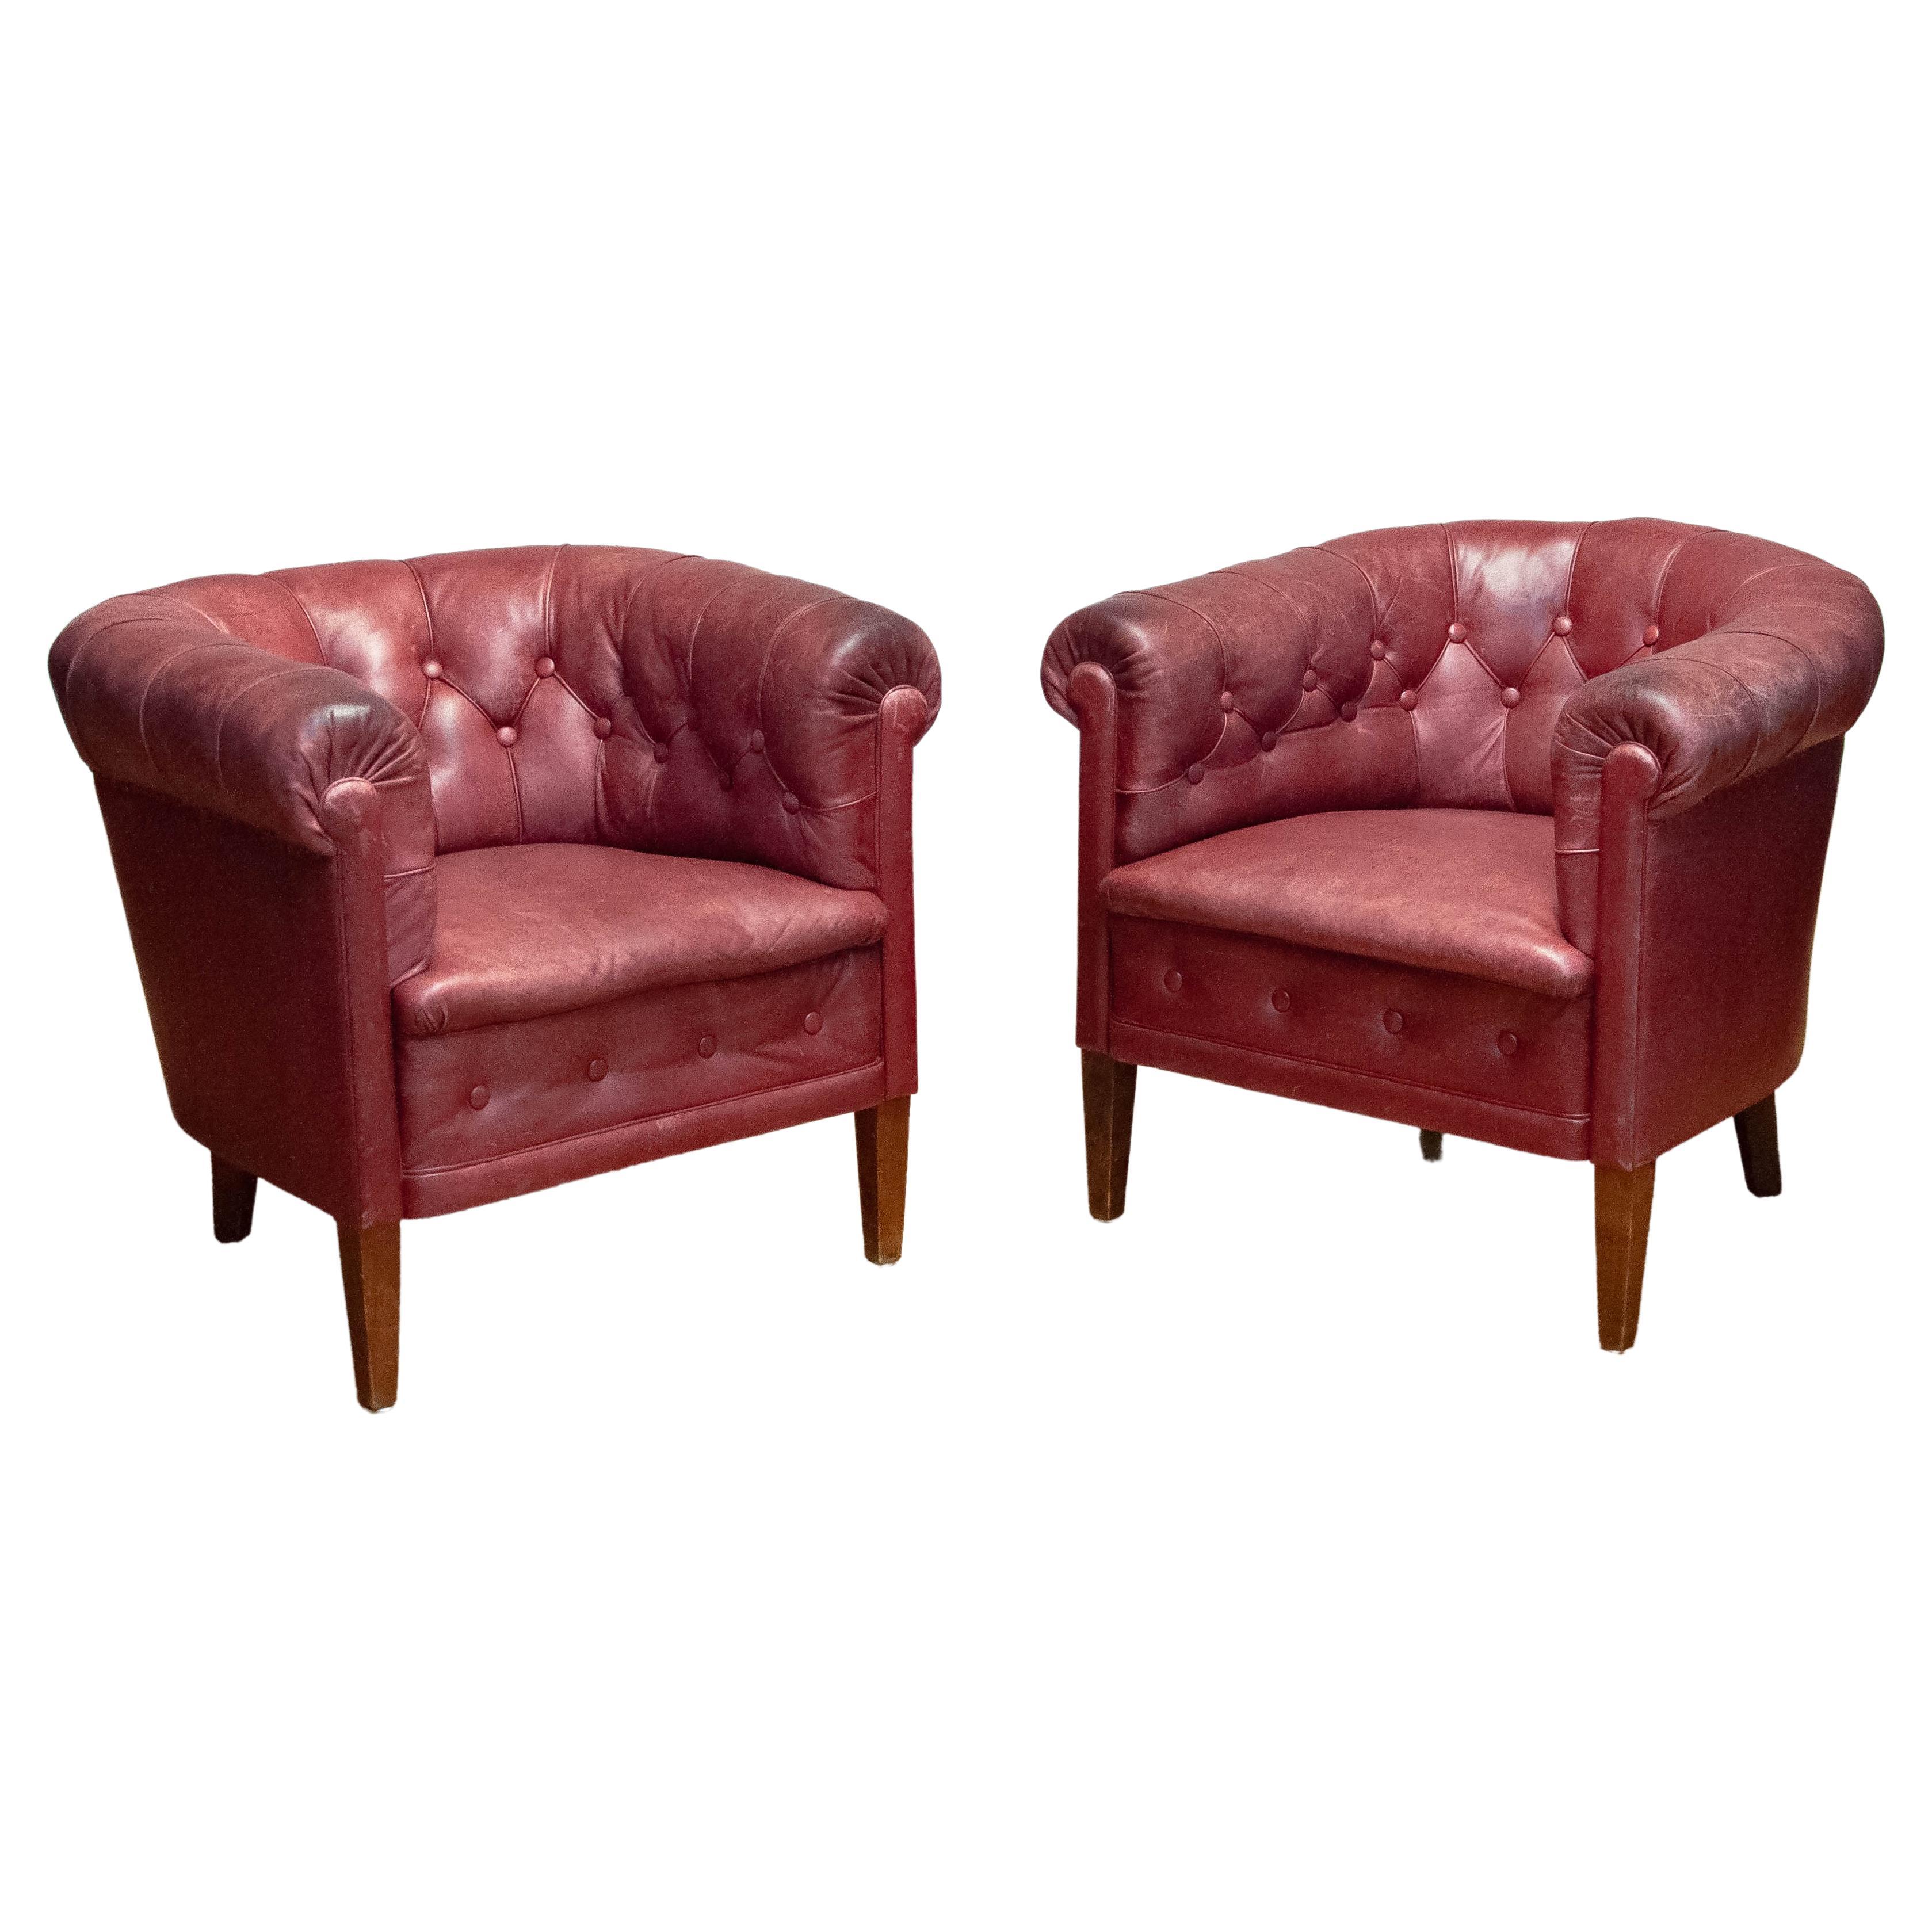 Pair 1930s Swedish Crimson Red Chesterfield Club Chairs in Patinated Leather For Sale